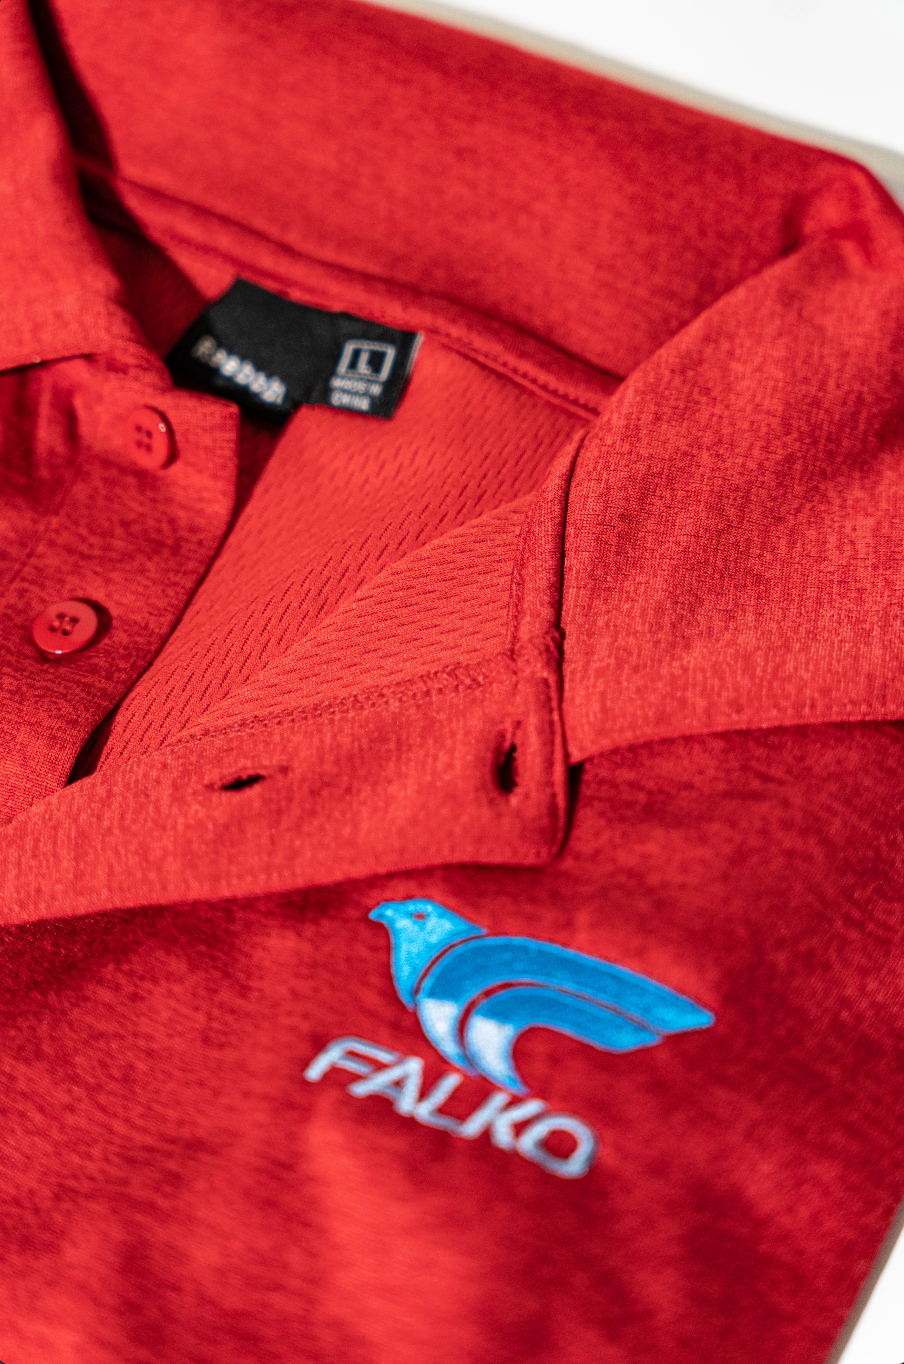 Falko's Sunday Red: Unleash Your Inner Champion on the Course!